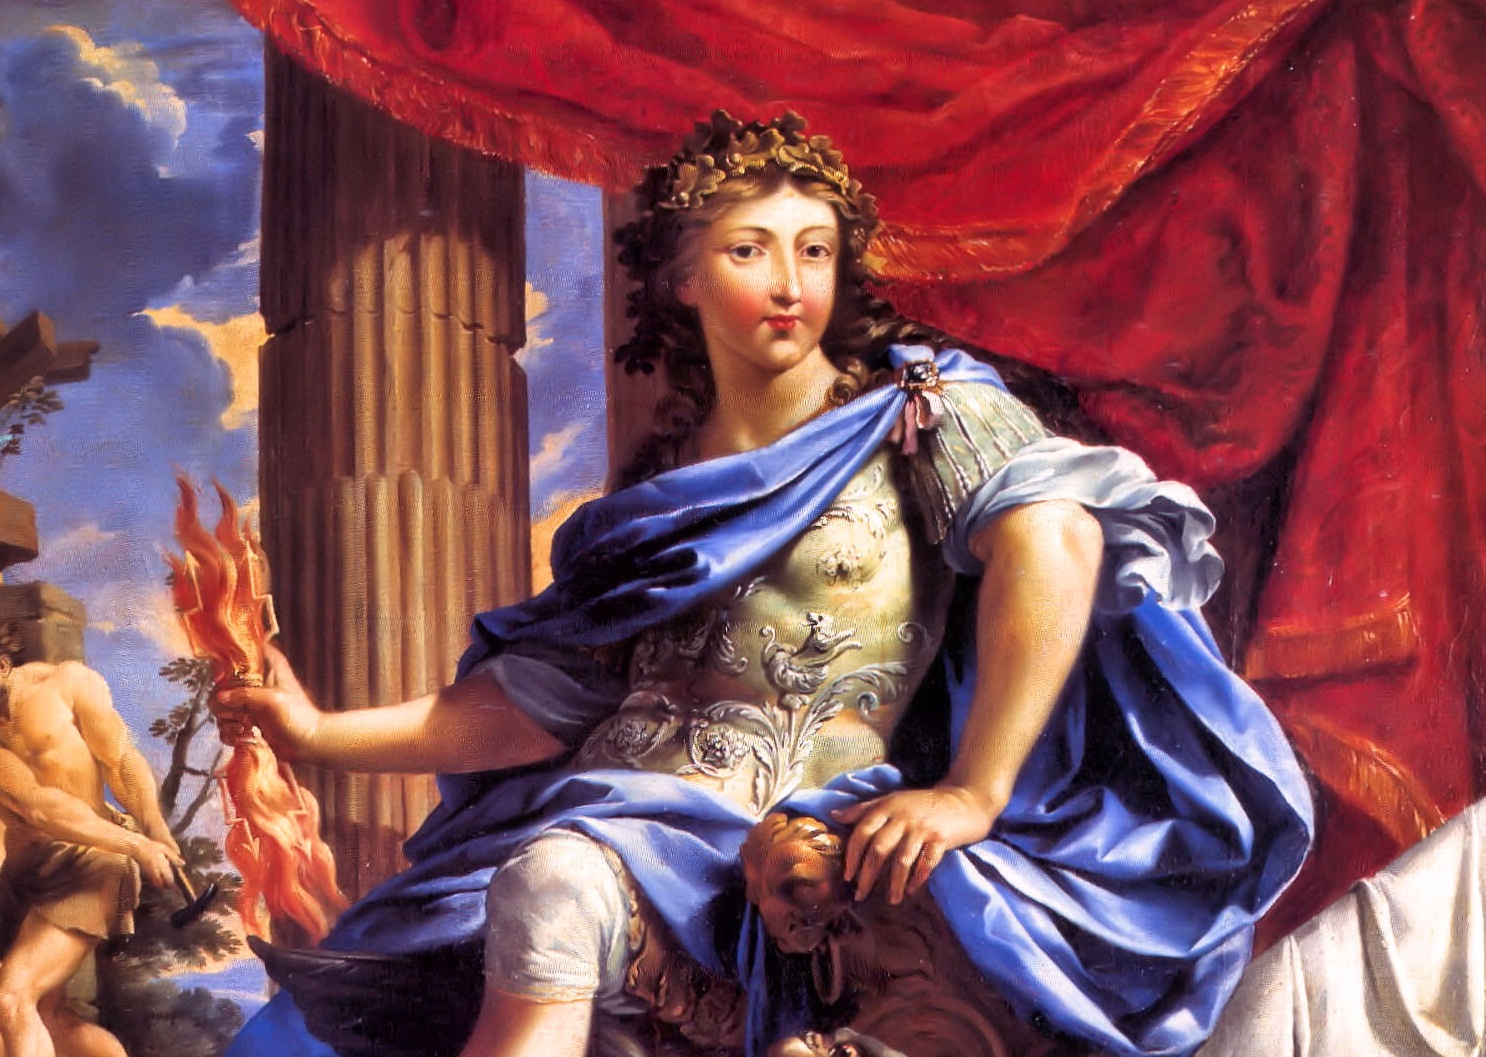 1638: Birth of the French King Louis XIV – the Most Powerful Ruler in Europe | www.semadata.org